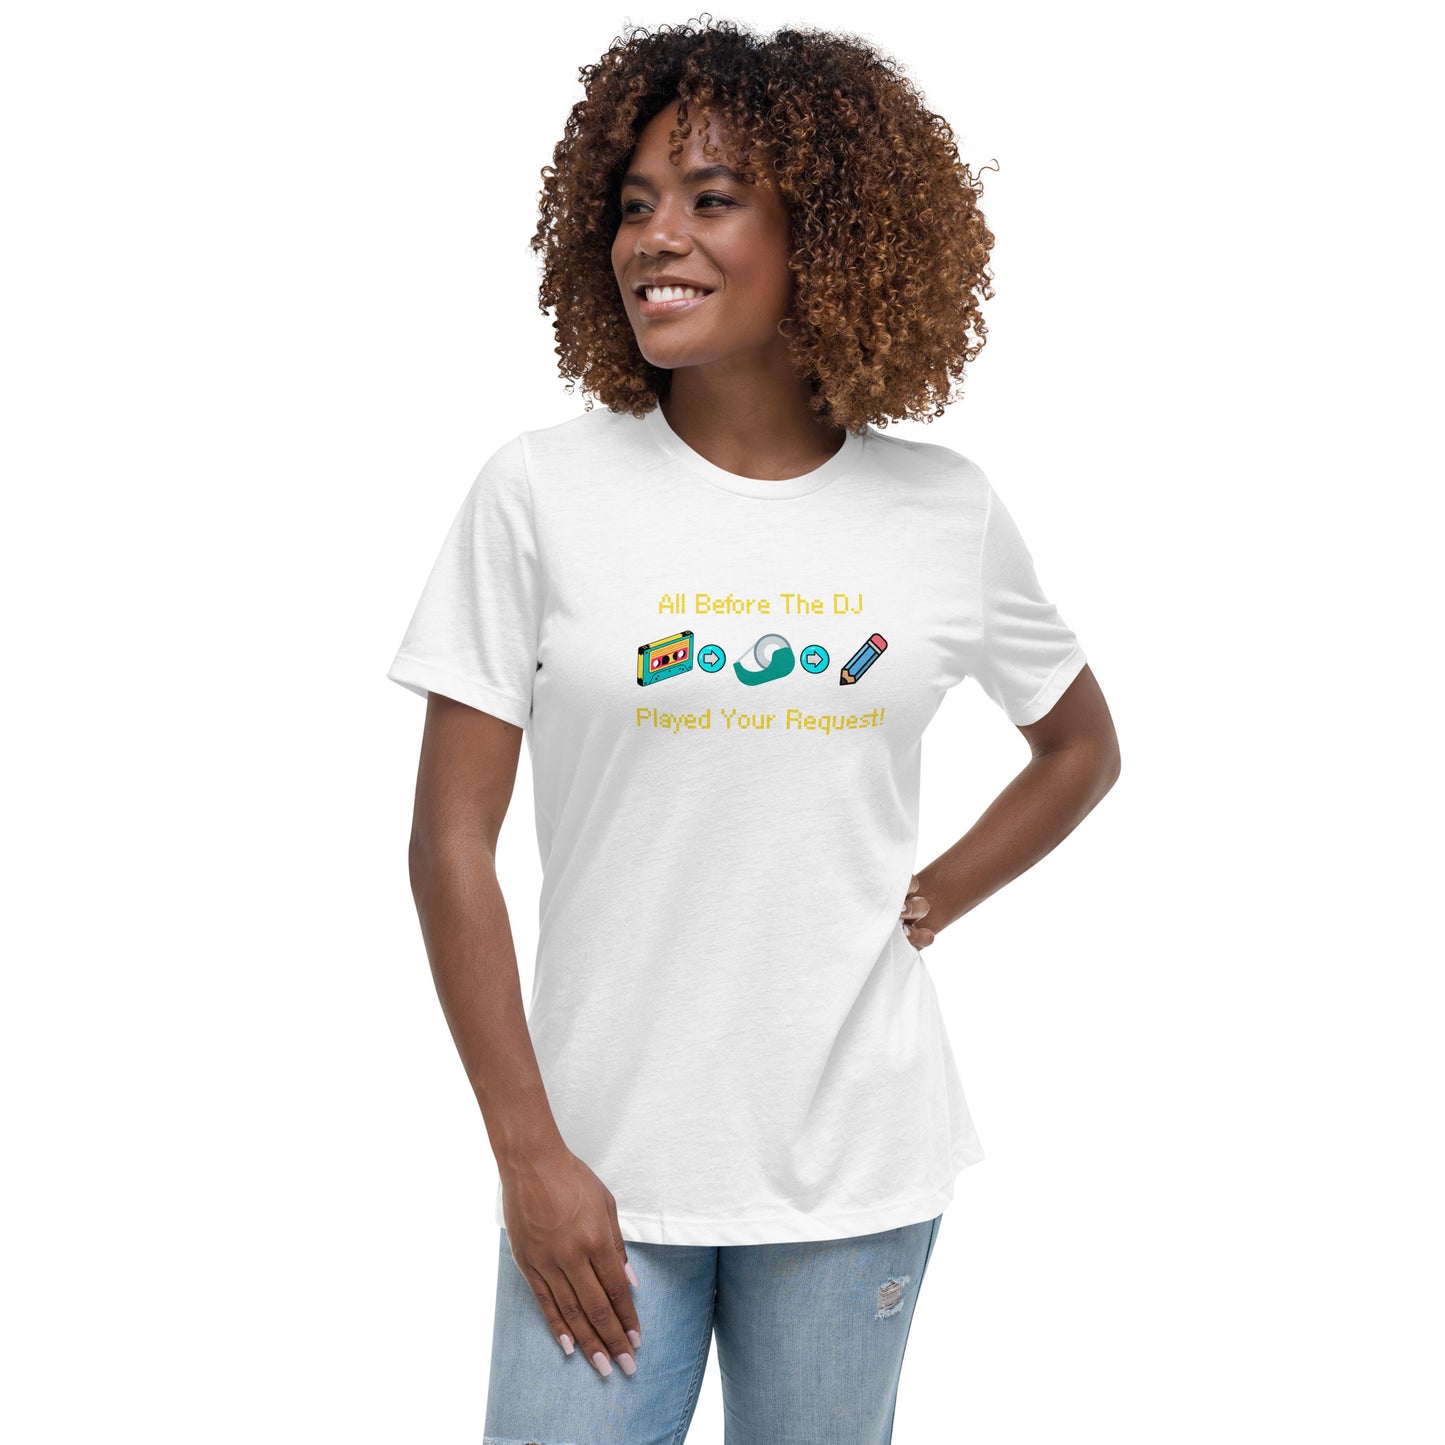 All Before The DJ Played Your Request! Women's Relaxed T-Shirt